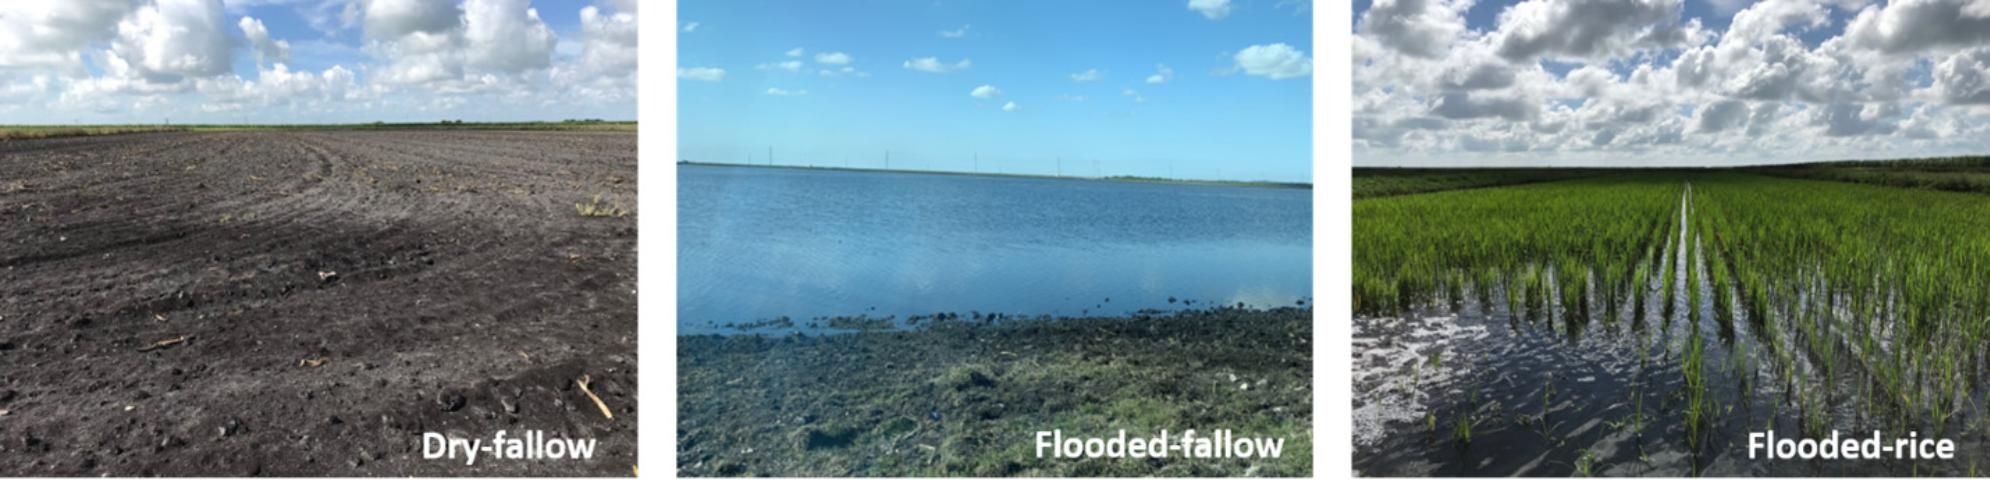 Figure 1. Three common land management practices in the EAA during summer: (i) dry-fallow; (ii) flooded-fallow; (iii) flooded-rice.